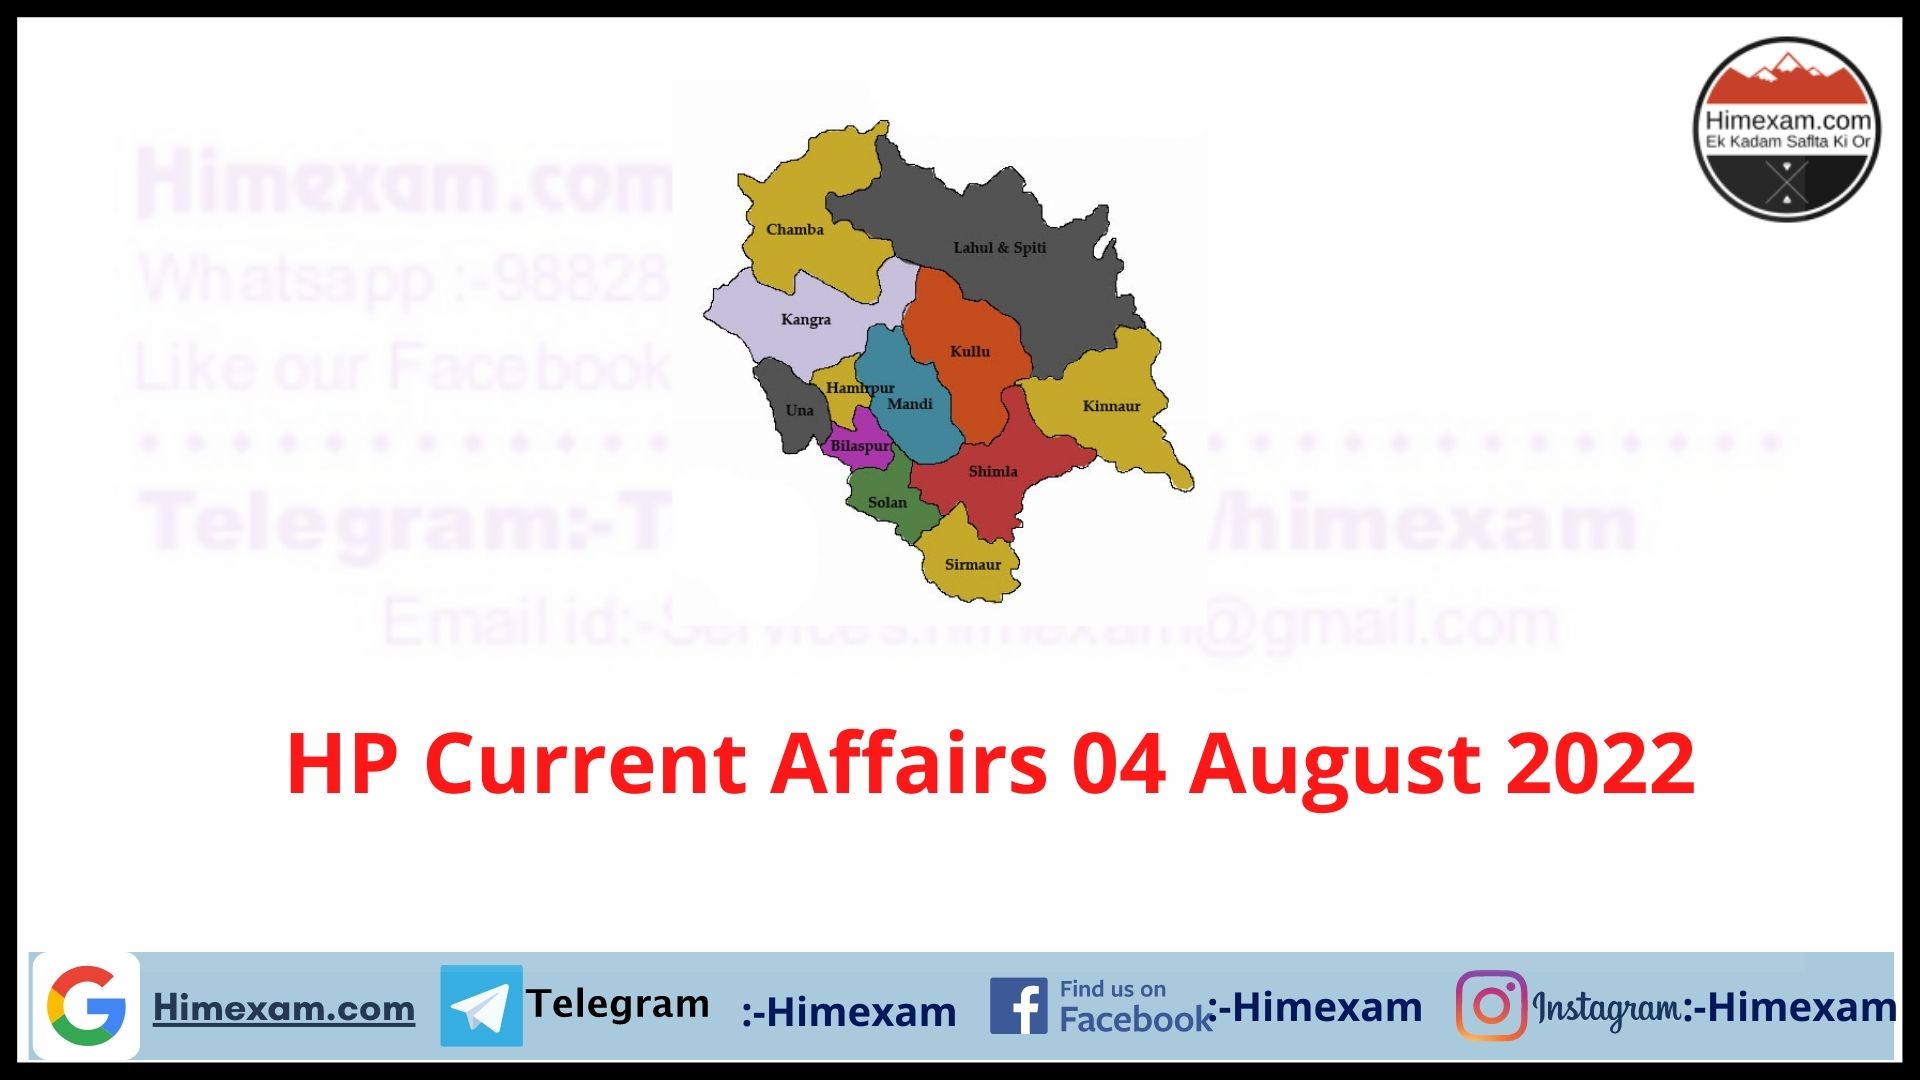 HP Current Affairs 04 August 2022